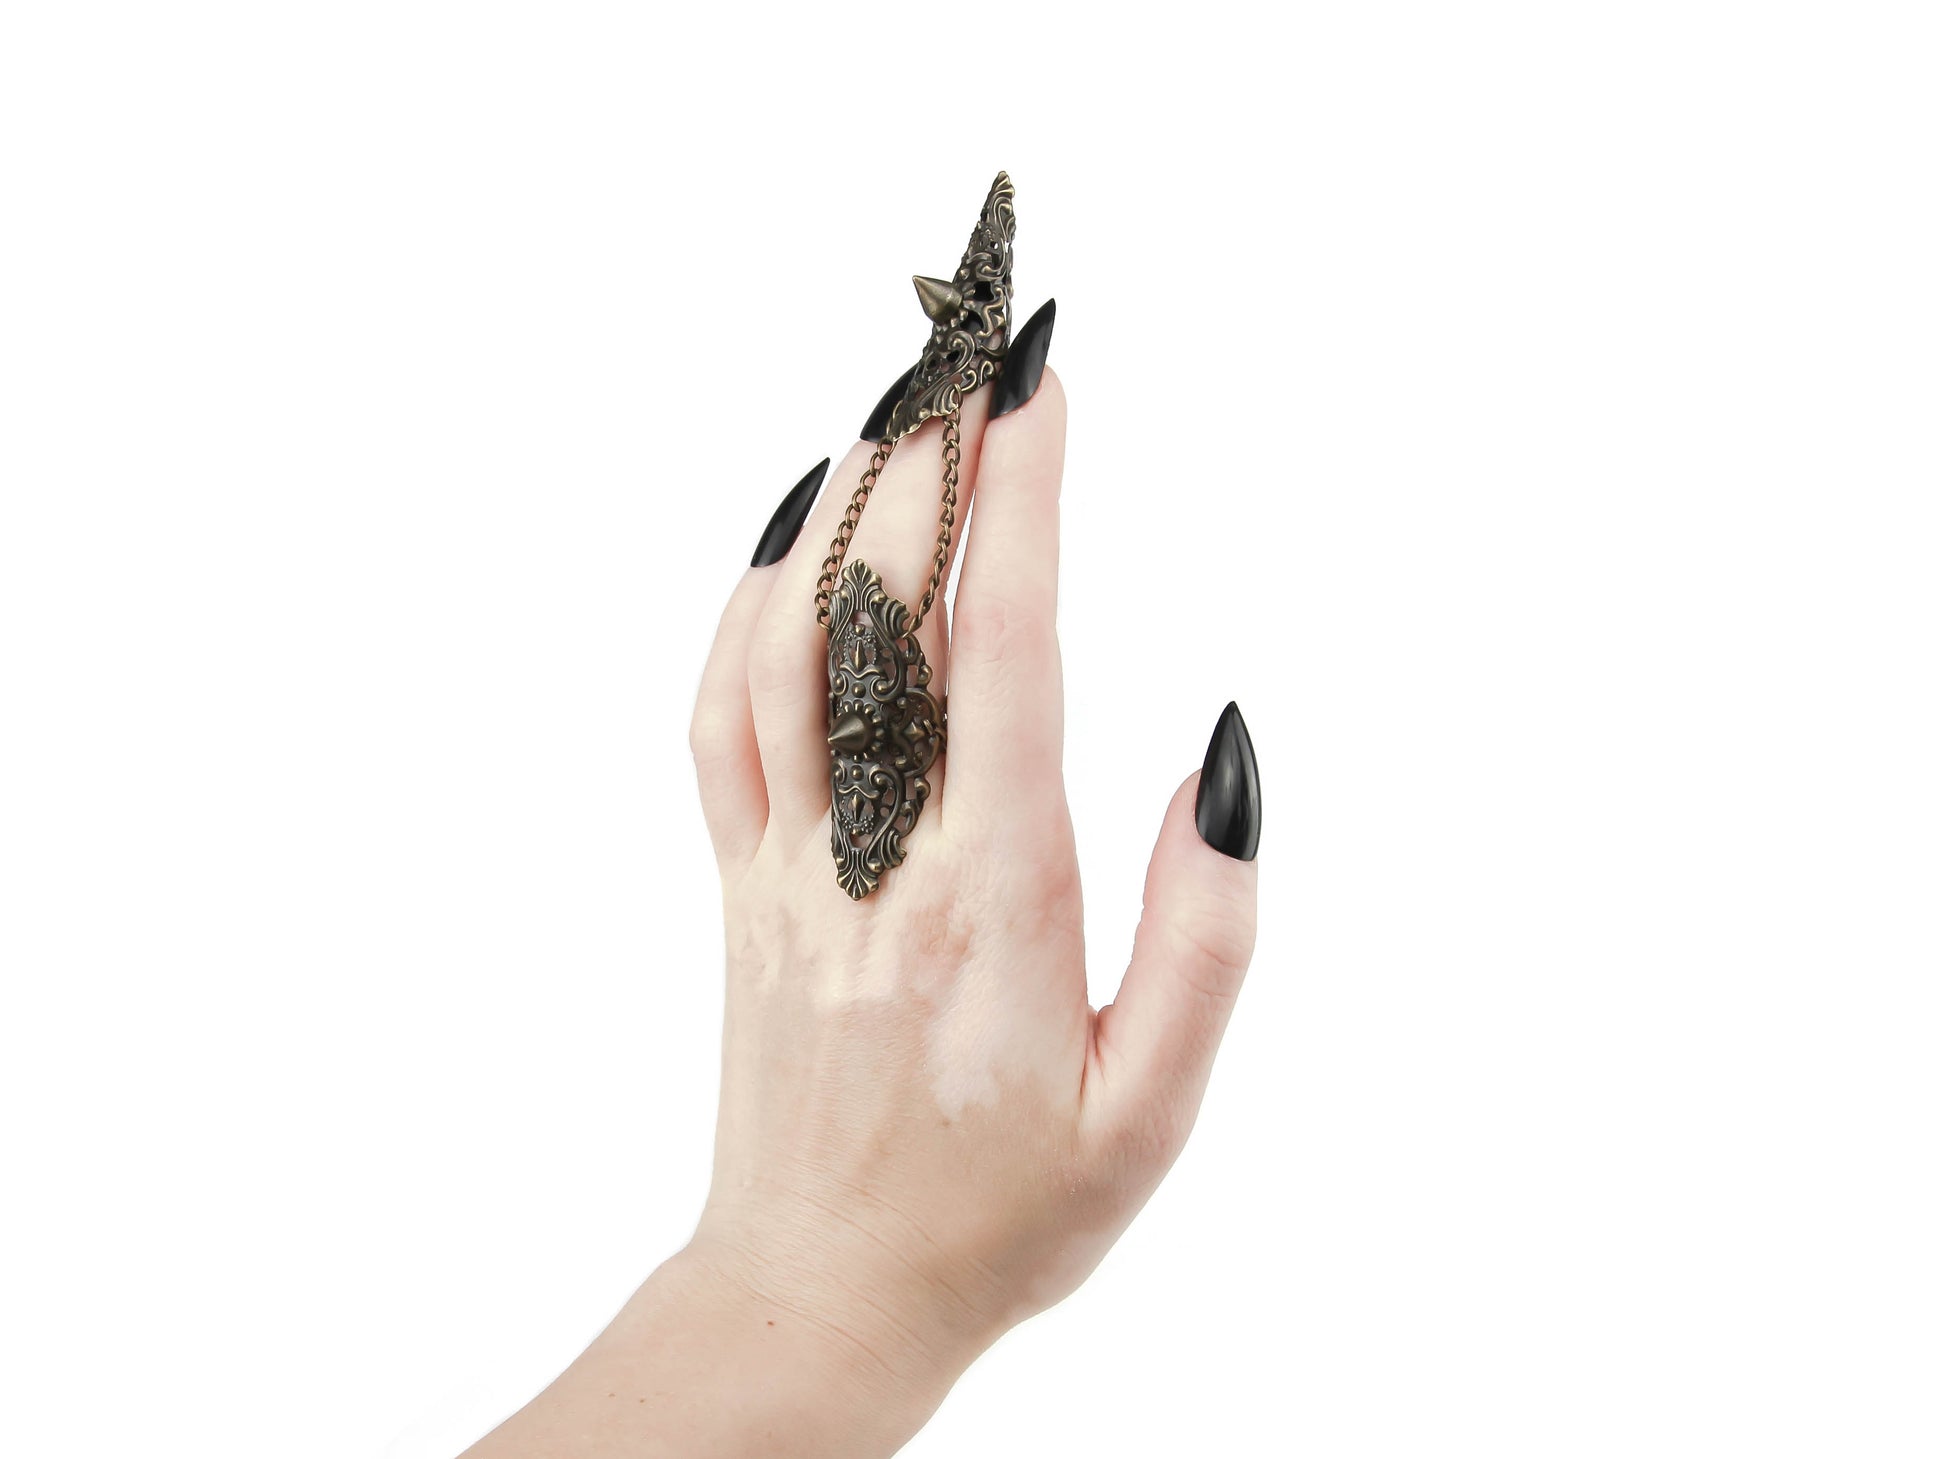 Enhance your gothic ensemble with Myril Jewels' studded claw ring in bronze, an exquisite piece of neo-goth jewelry. Worn on the middle finger, this ring features an intricate filigree design and is connected by a delicate chain to a matching band, creating a dramatic statement. Perfect for Halloween, punk style, or everyday wear, it captures the dark-avantgarde essence and is a must-have for gothic-chic, whimsigoth, or witchcore fashion lovers.